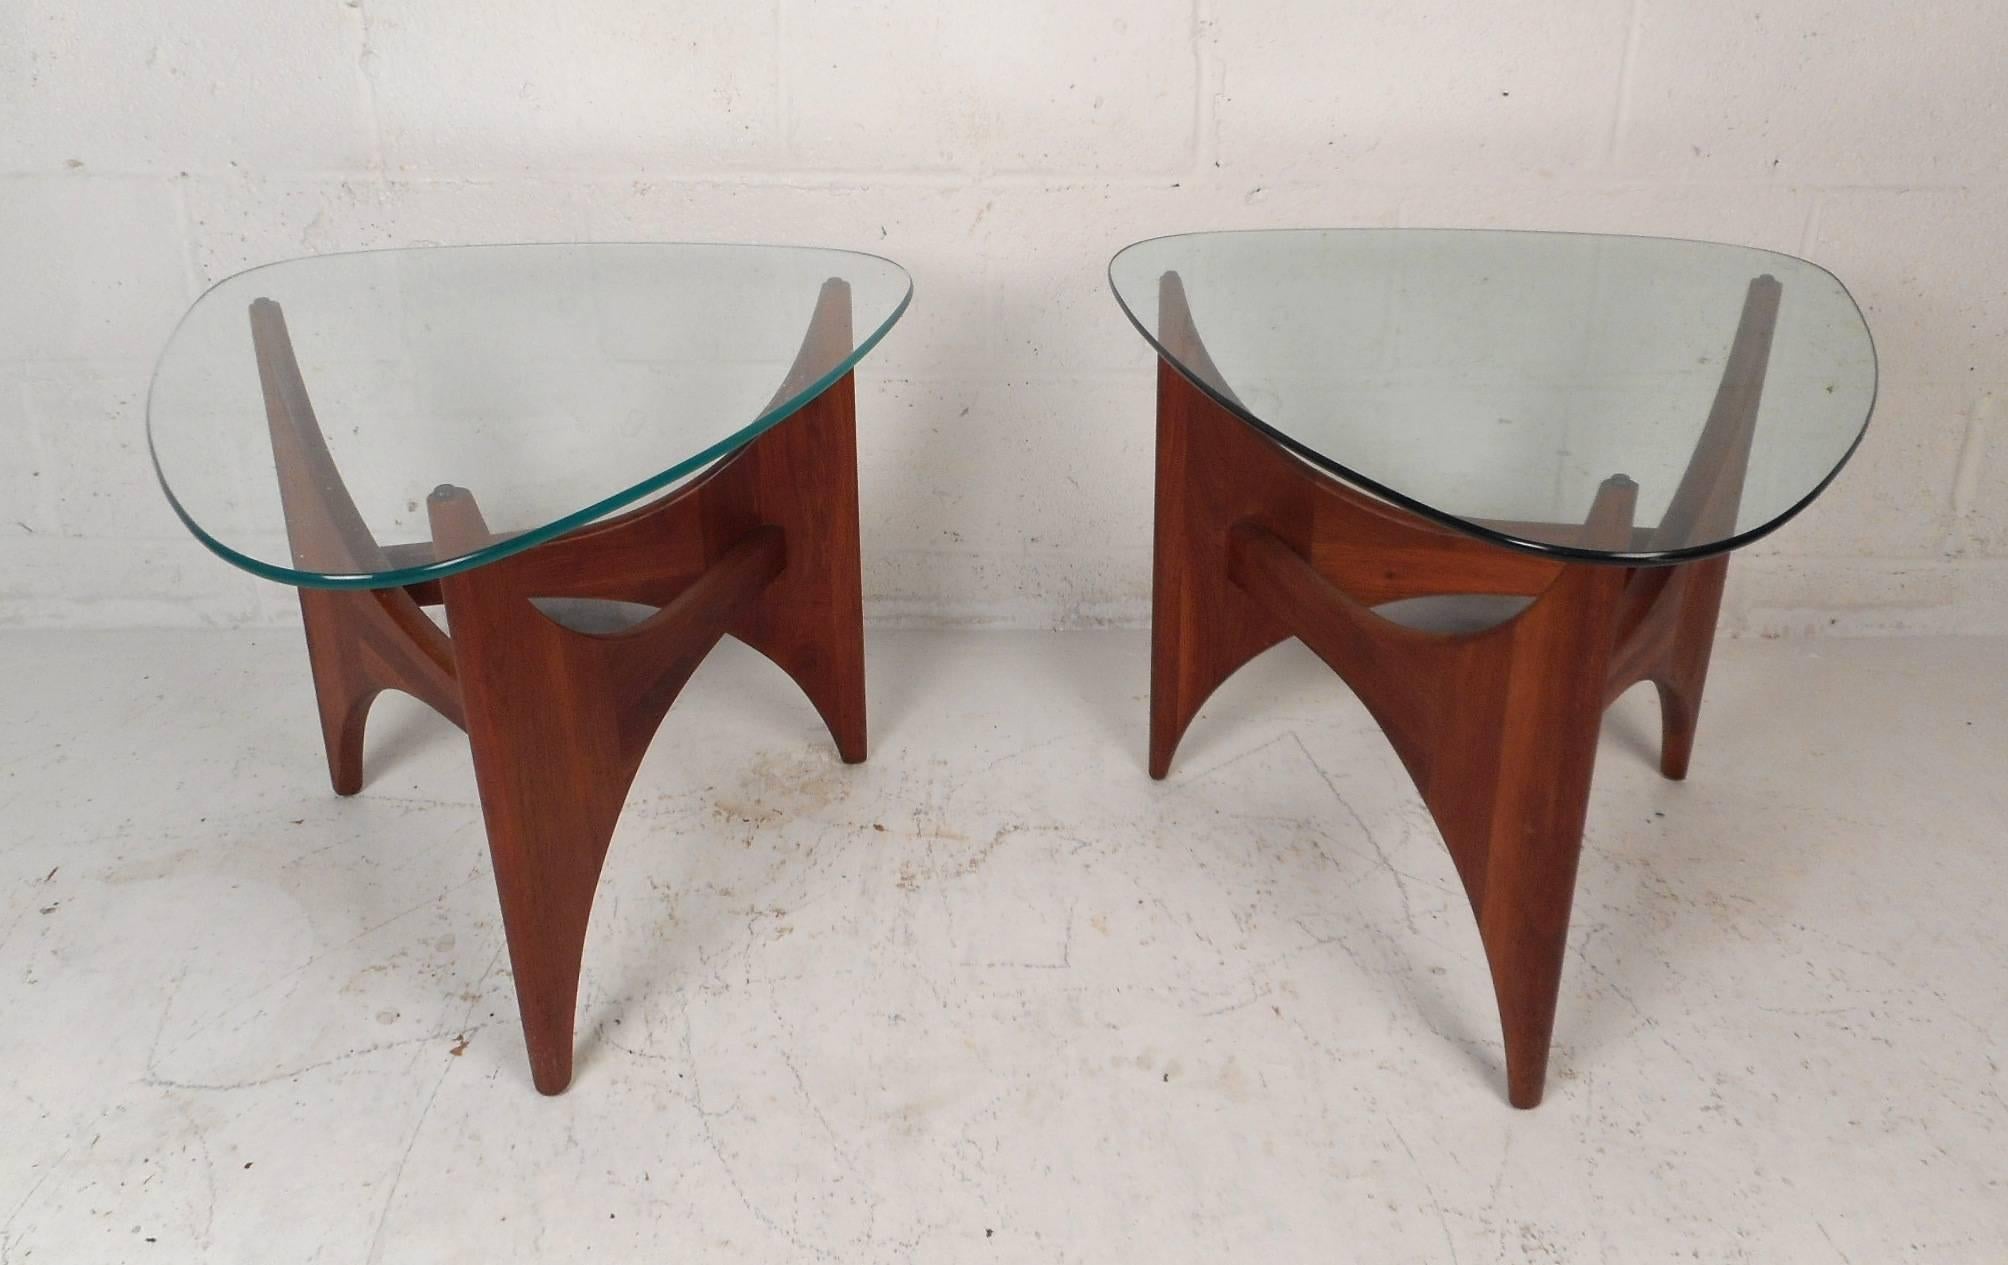 This gorgeous pair of vintage modern end tables feature triangular glass tops with a sculptural walnut base. These stylish and sturdy side tables make the perfect show stopping addition to any modern interior. Unique tapered design with sculpted